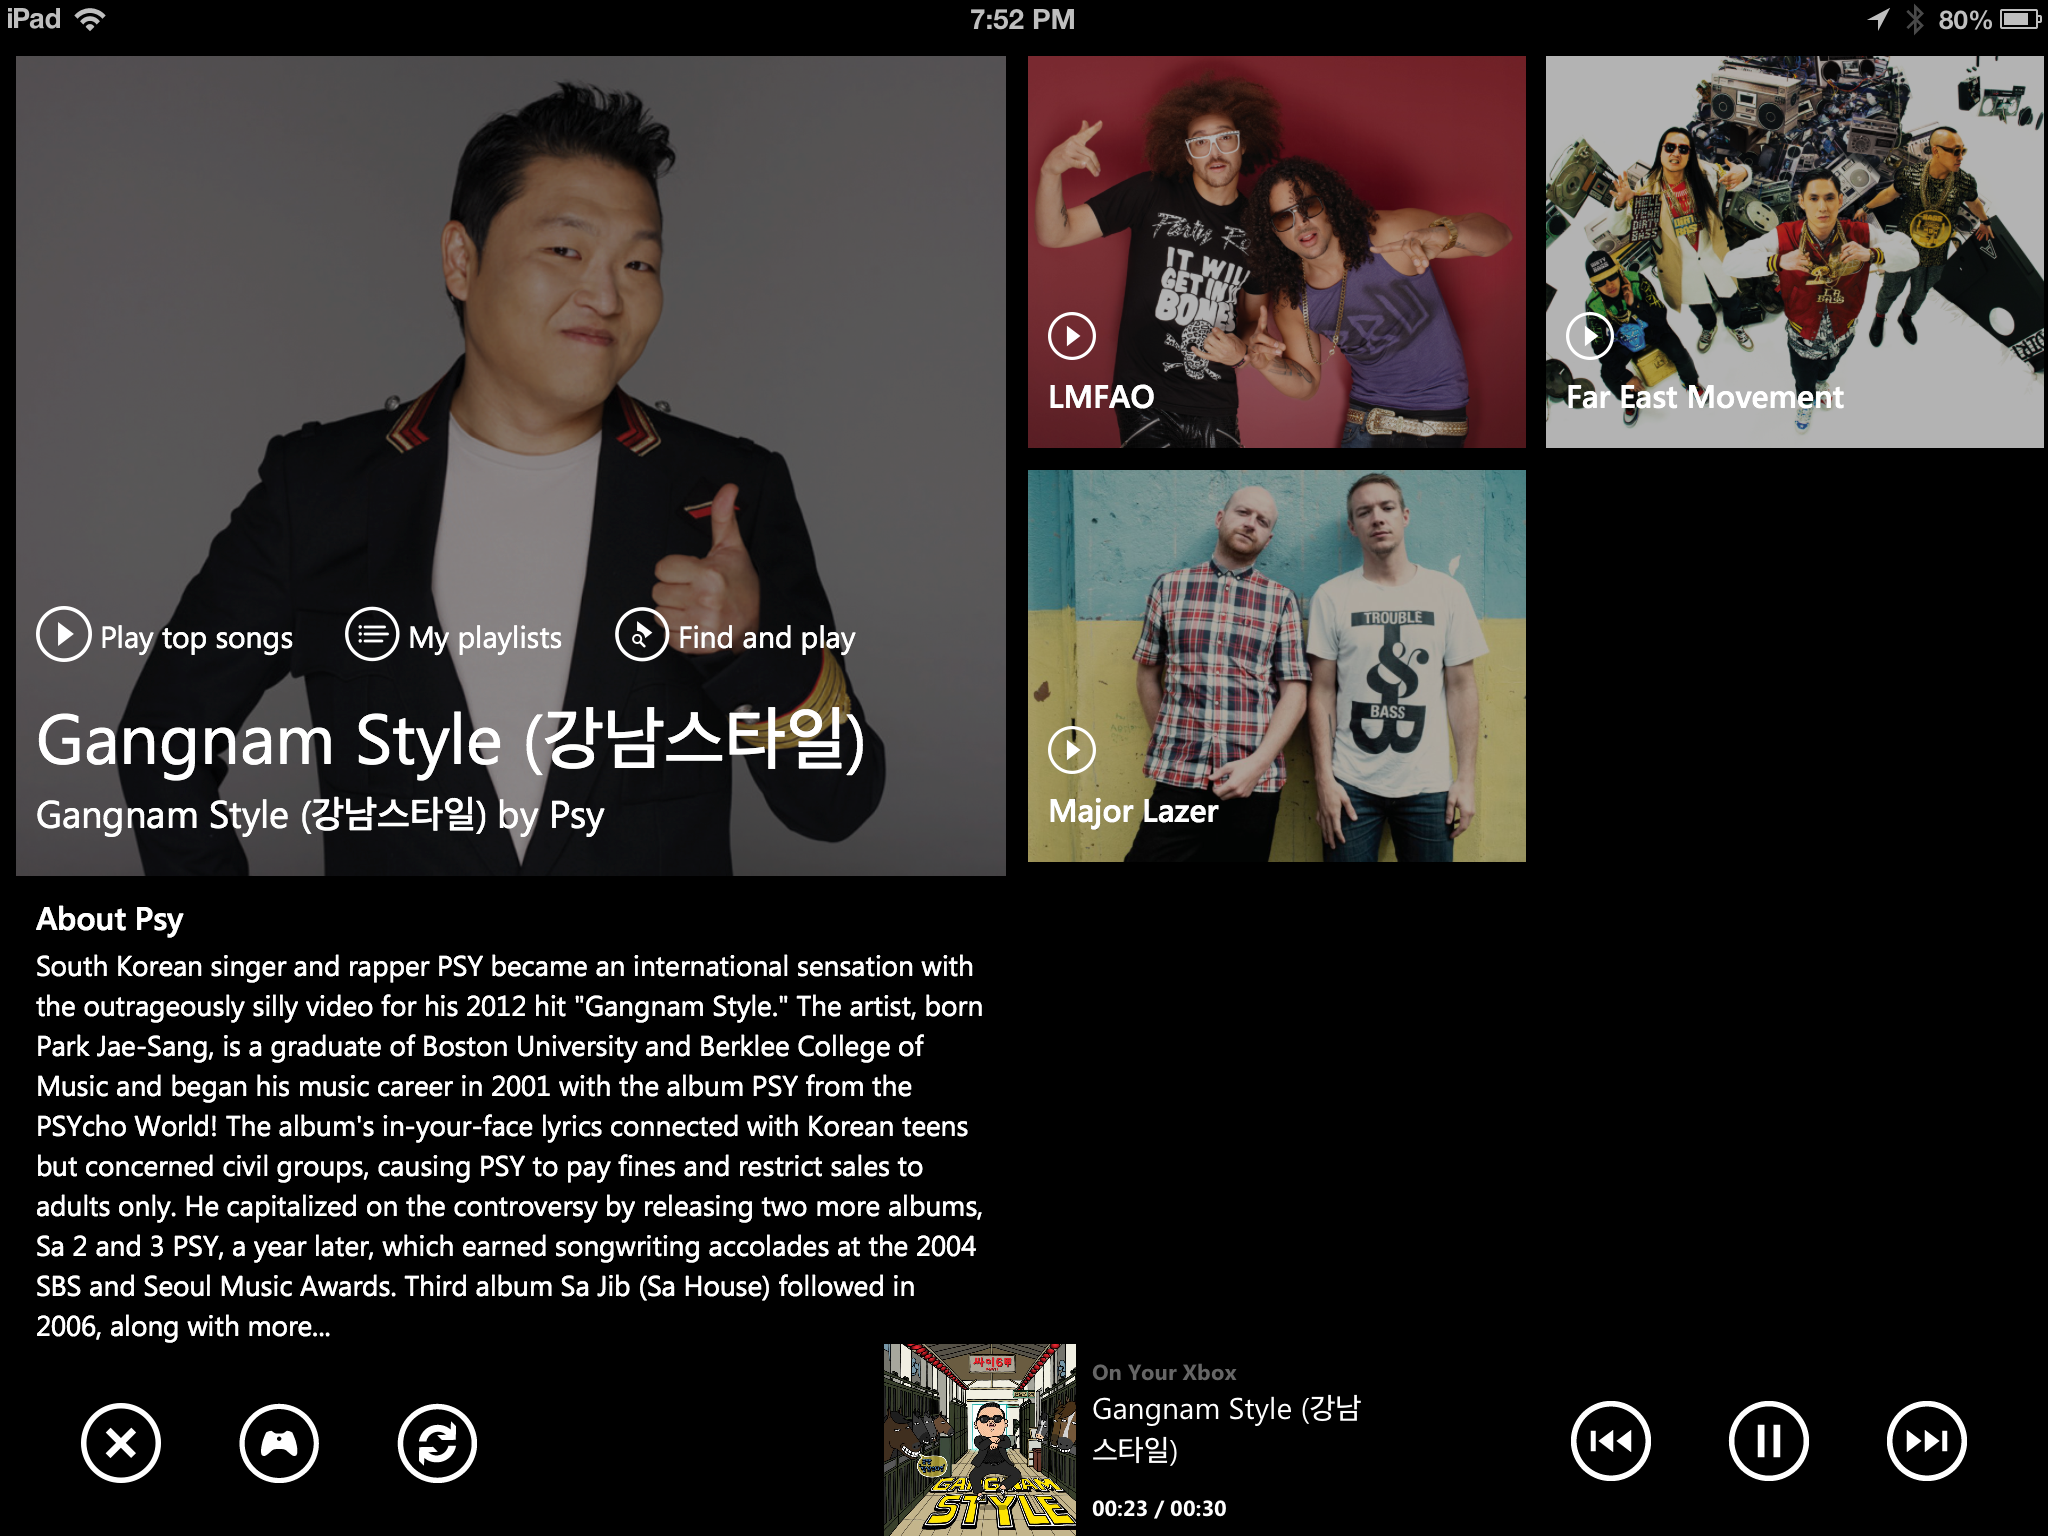 Second screen example using XBox Music